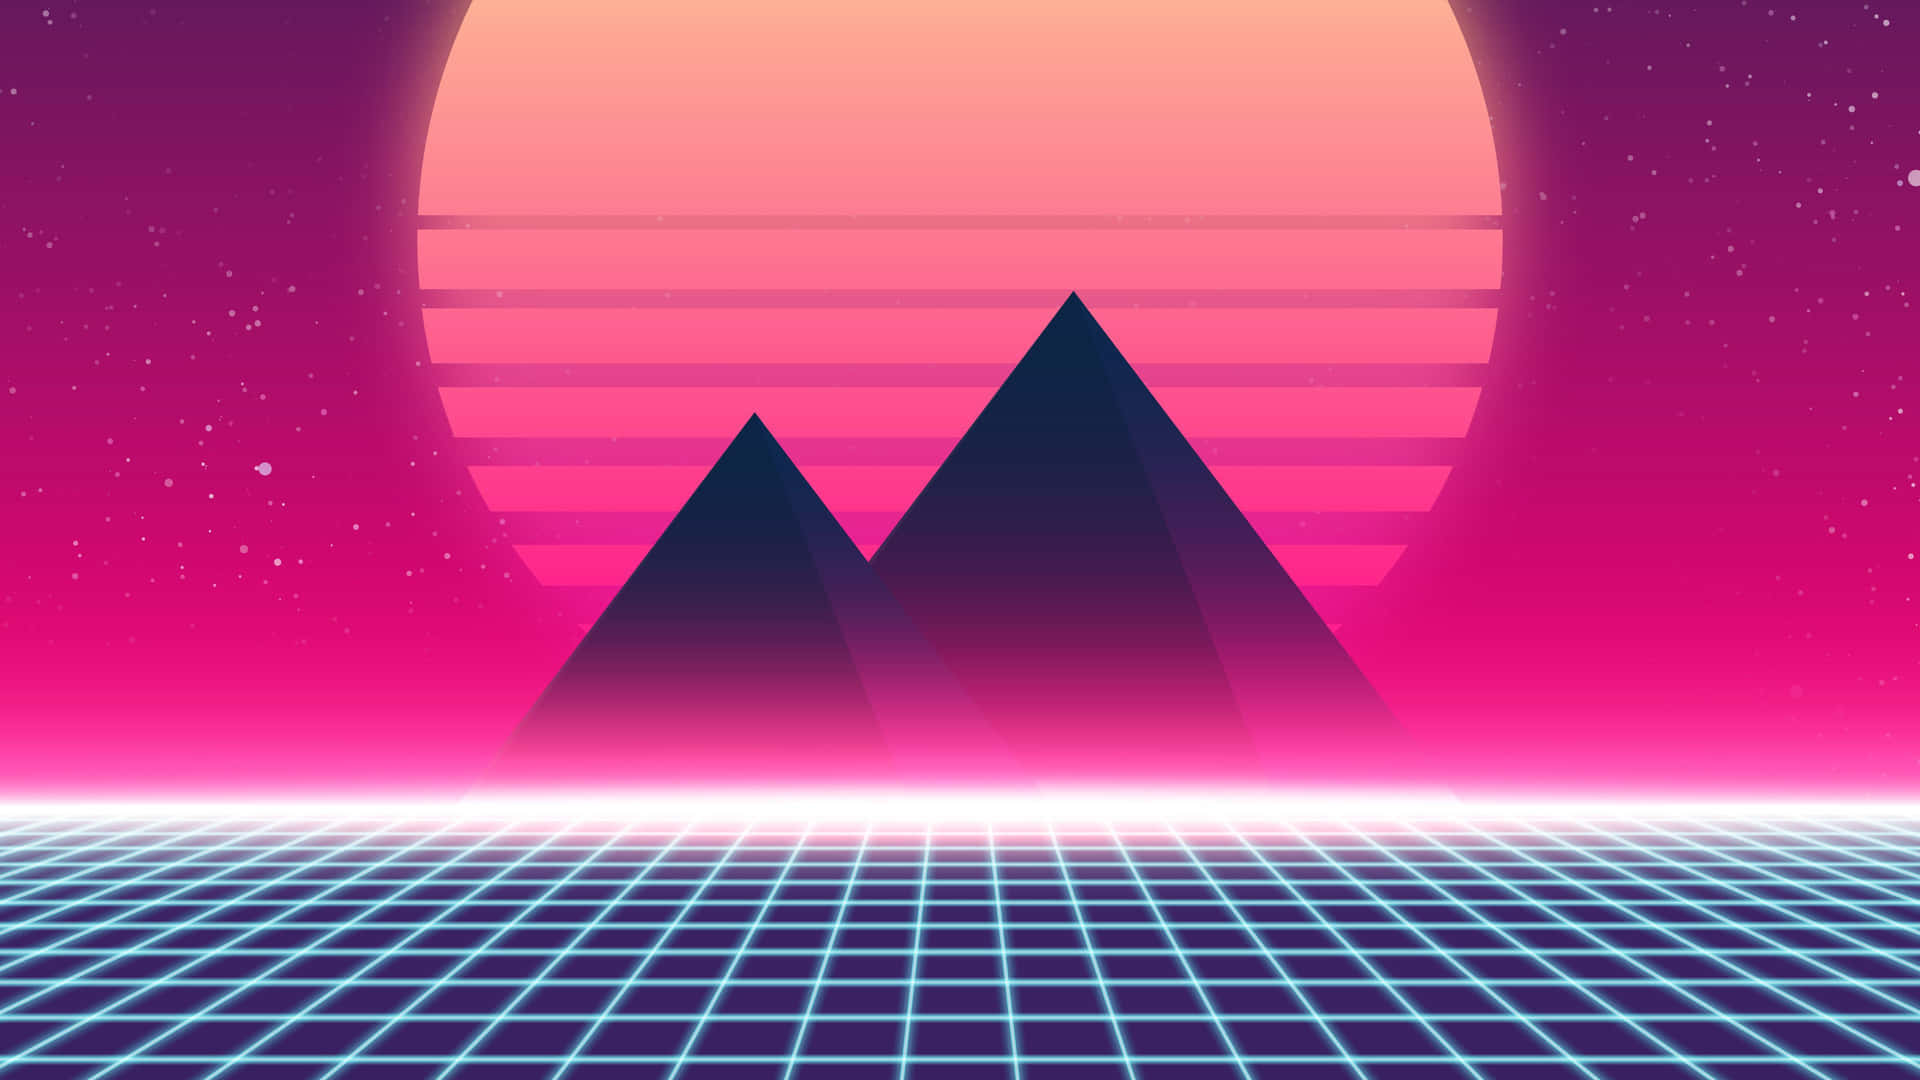 Experience the nostalgia of the '90s with this retro wallpaper